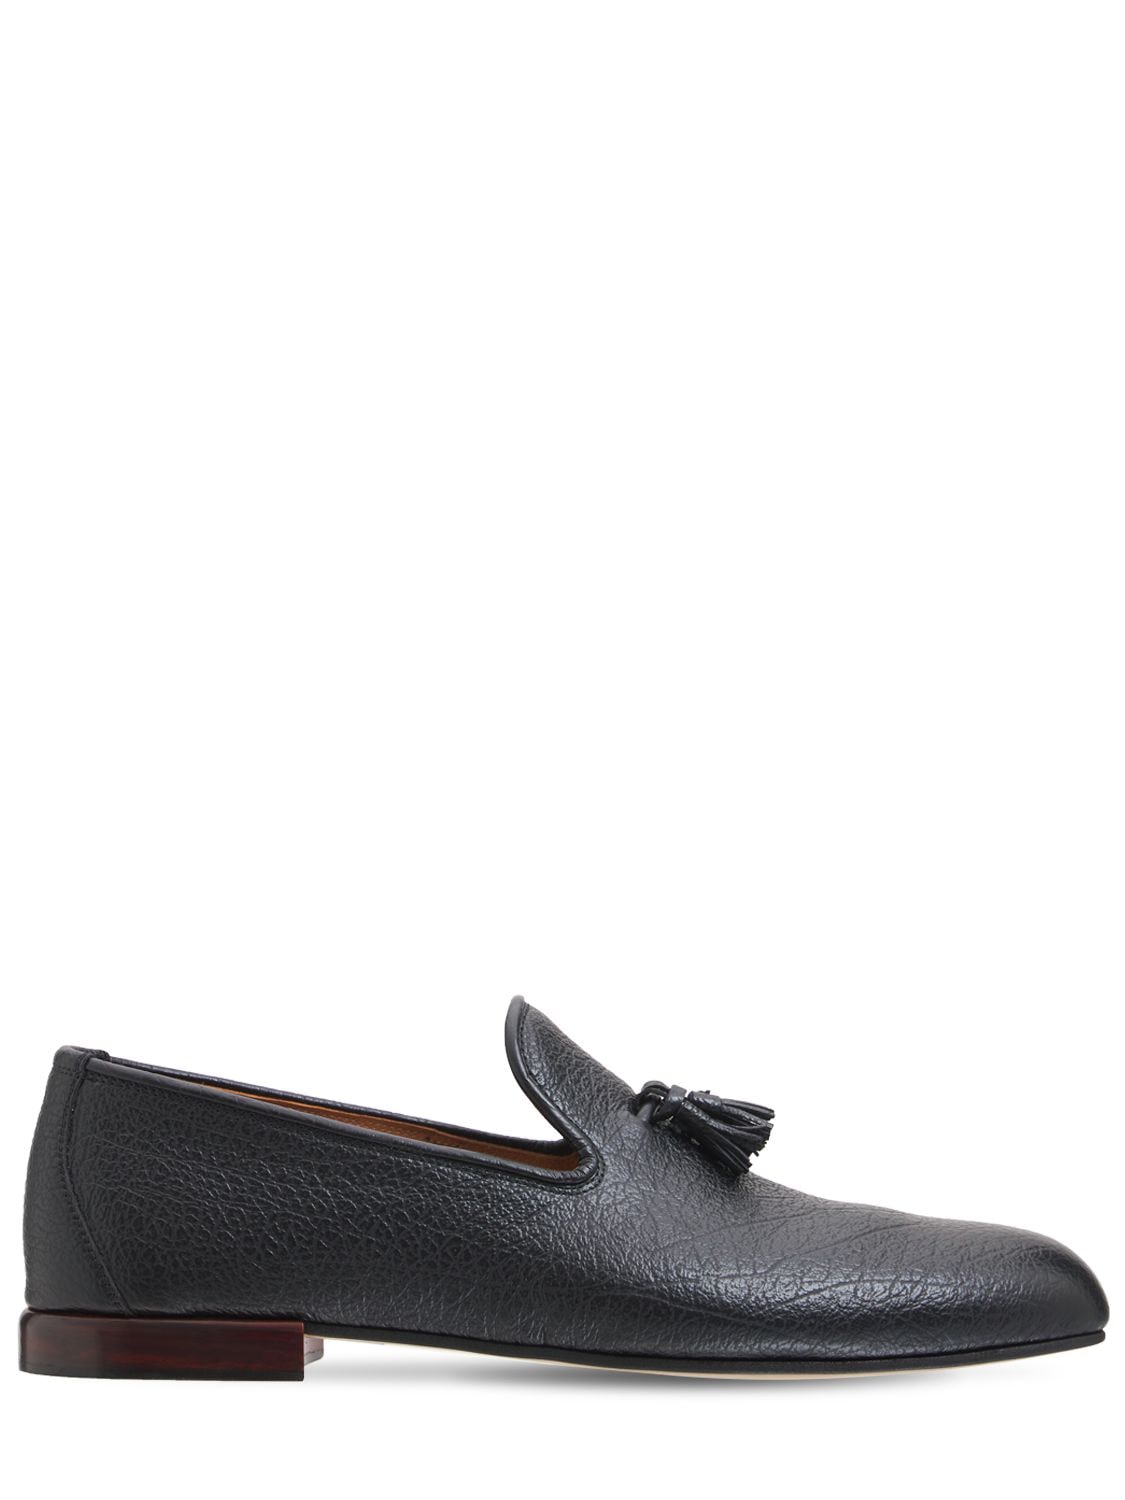 TOM FORD TEXTURED LEATHER LOAFERS W/ TASSELS